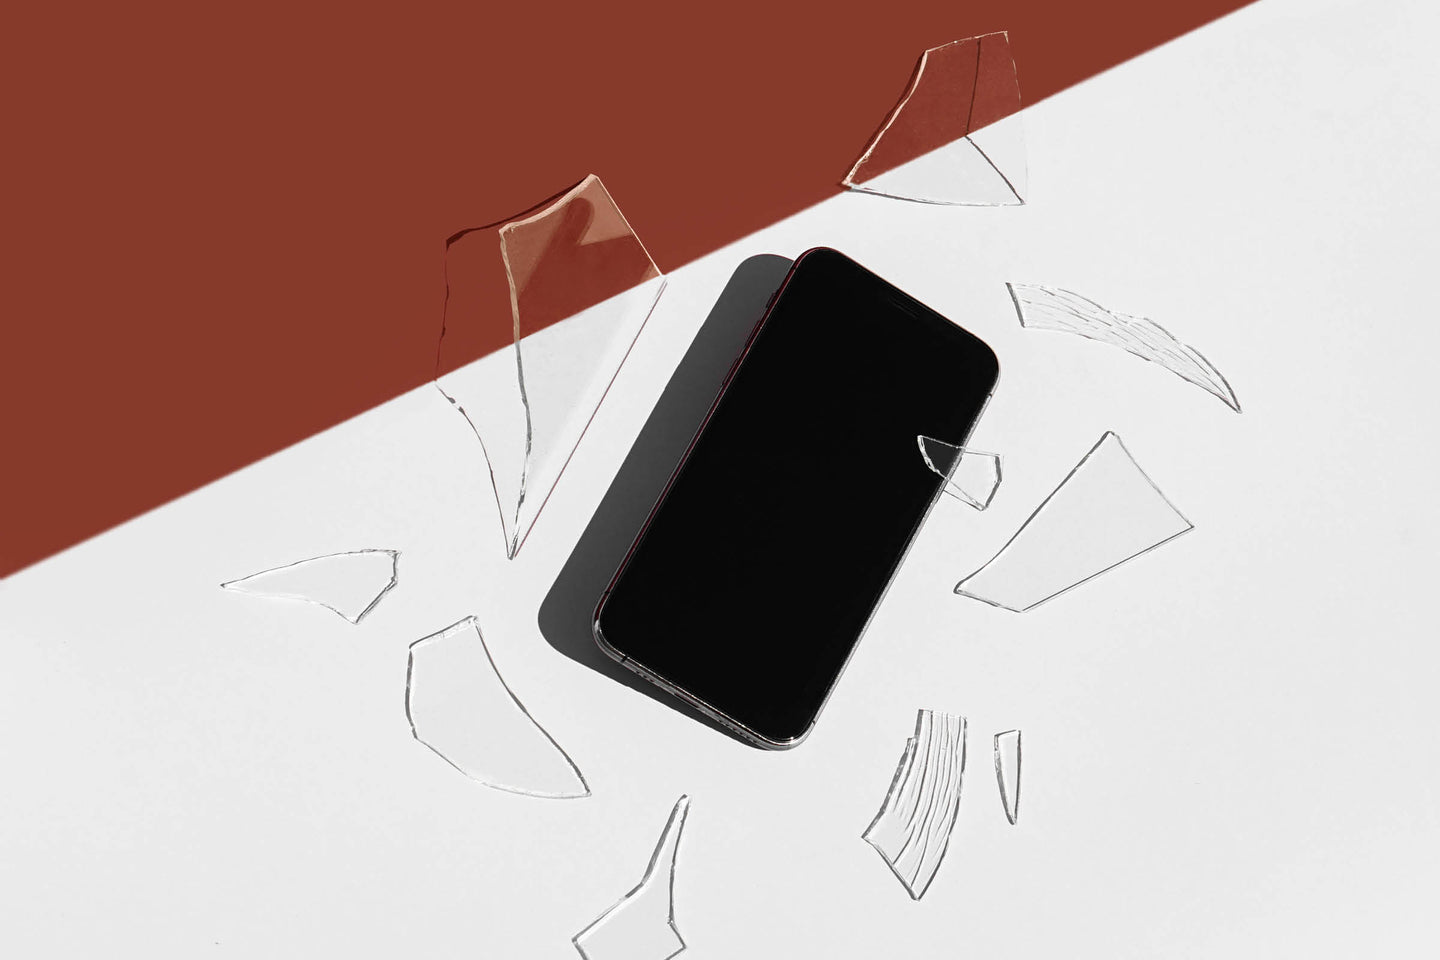 Screen protectors can protect your phone screen from cracks and damage.